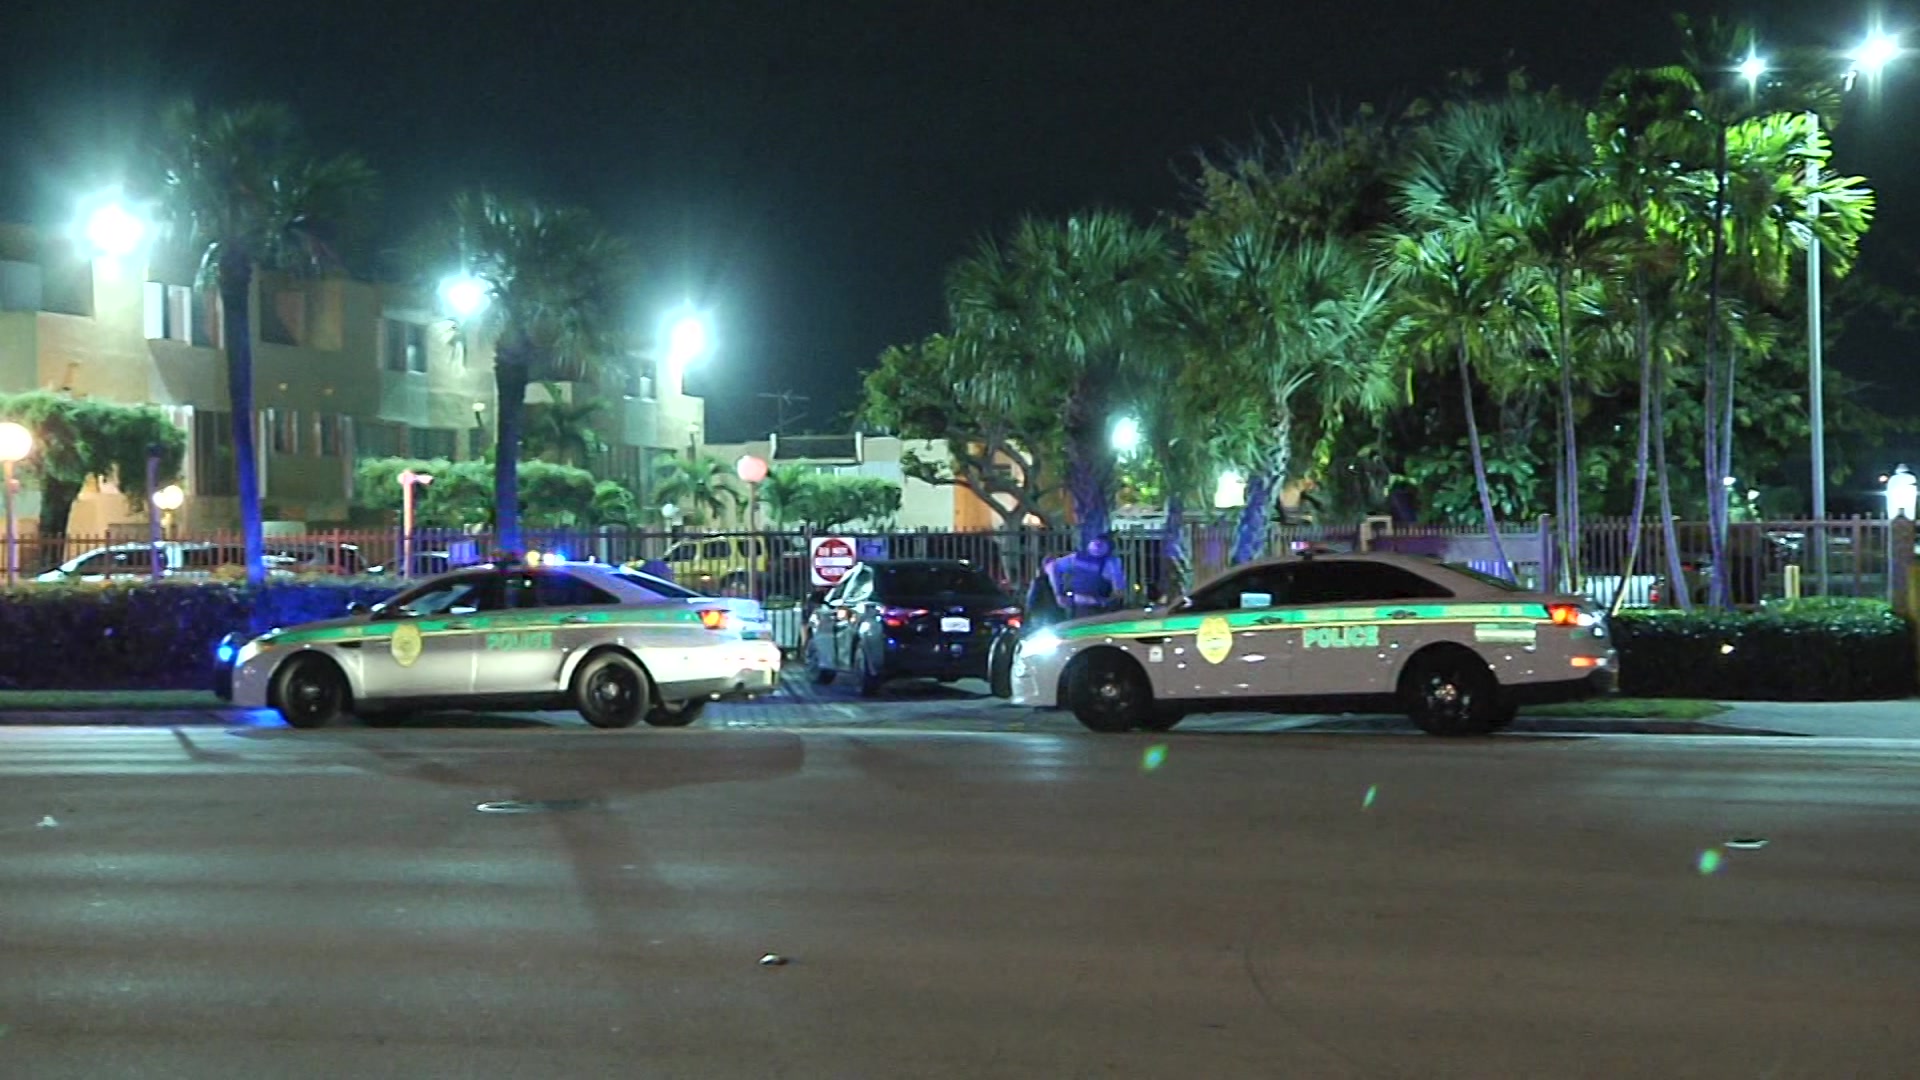 Search On For Miami Double Stabbing Suspect